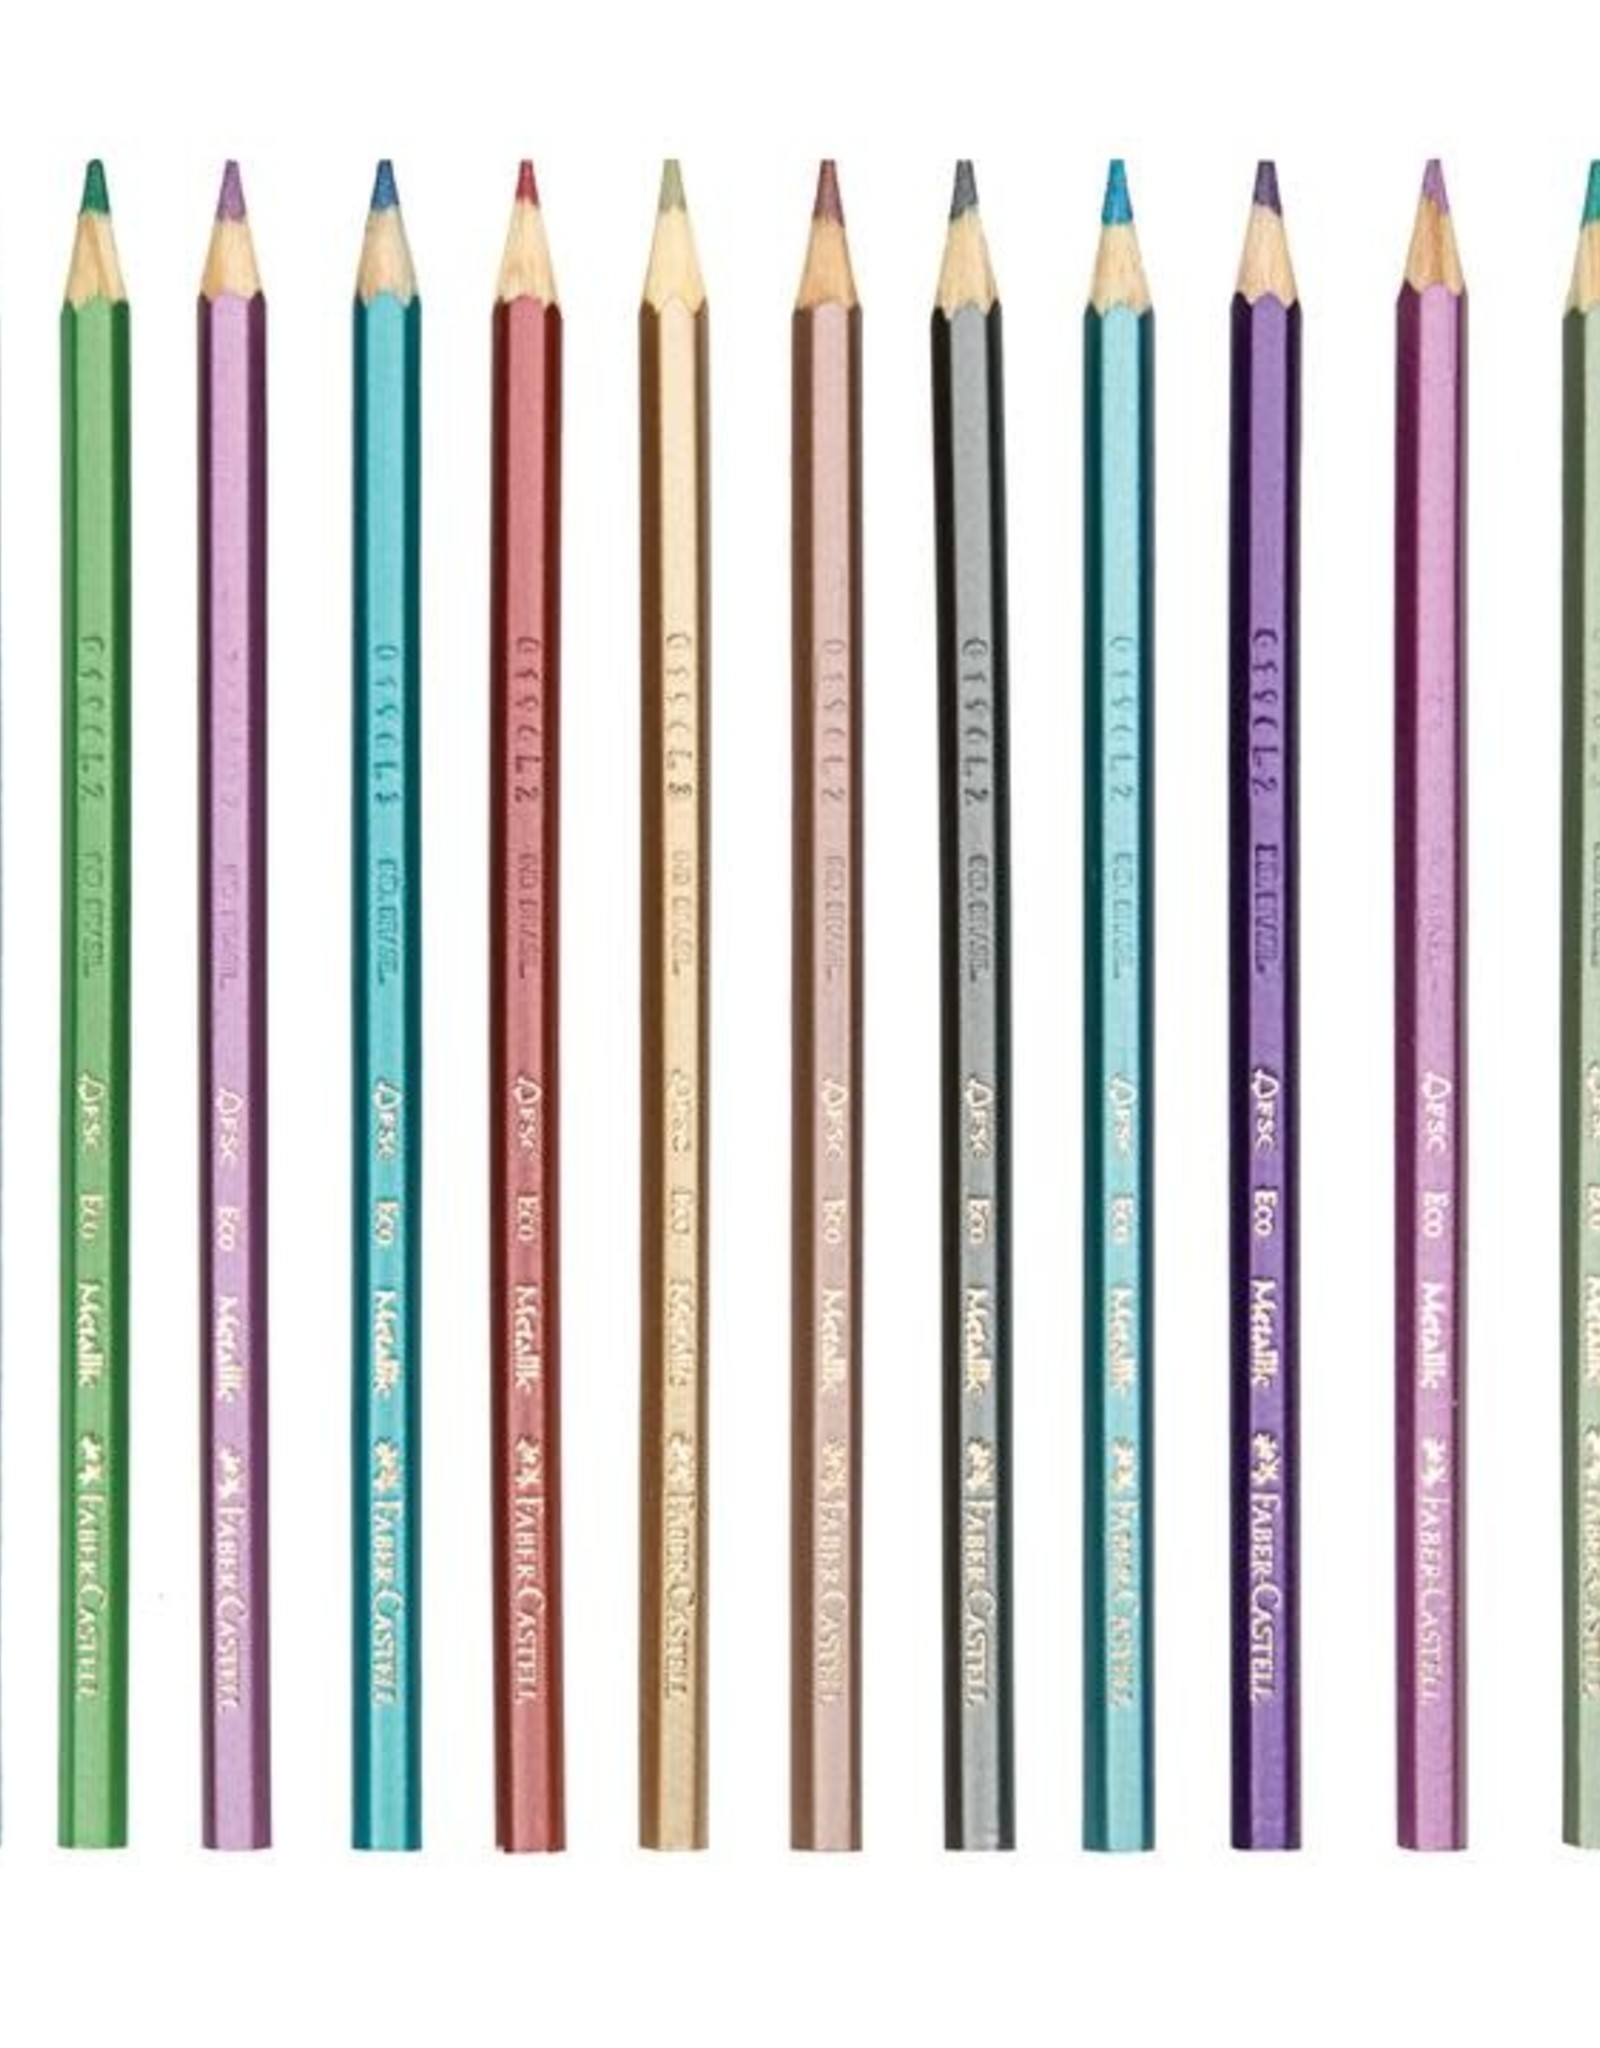 Faber-Castell 12ct Metallic Colored EcoPencils